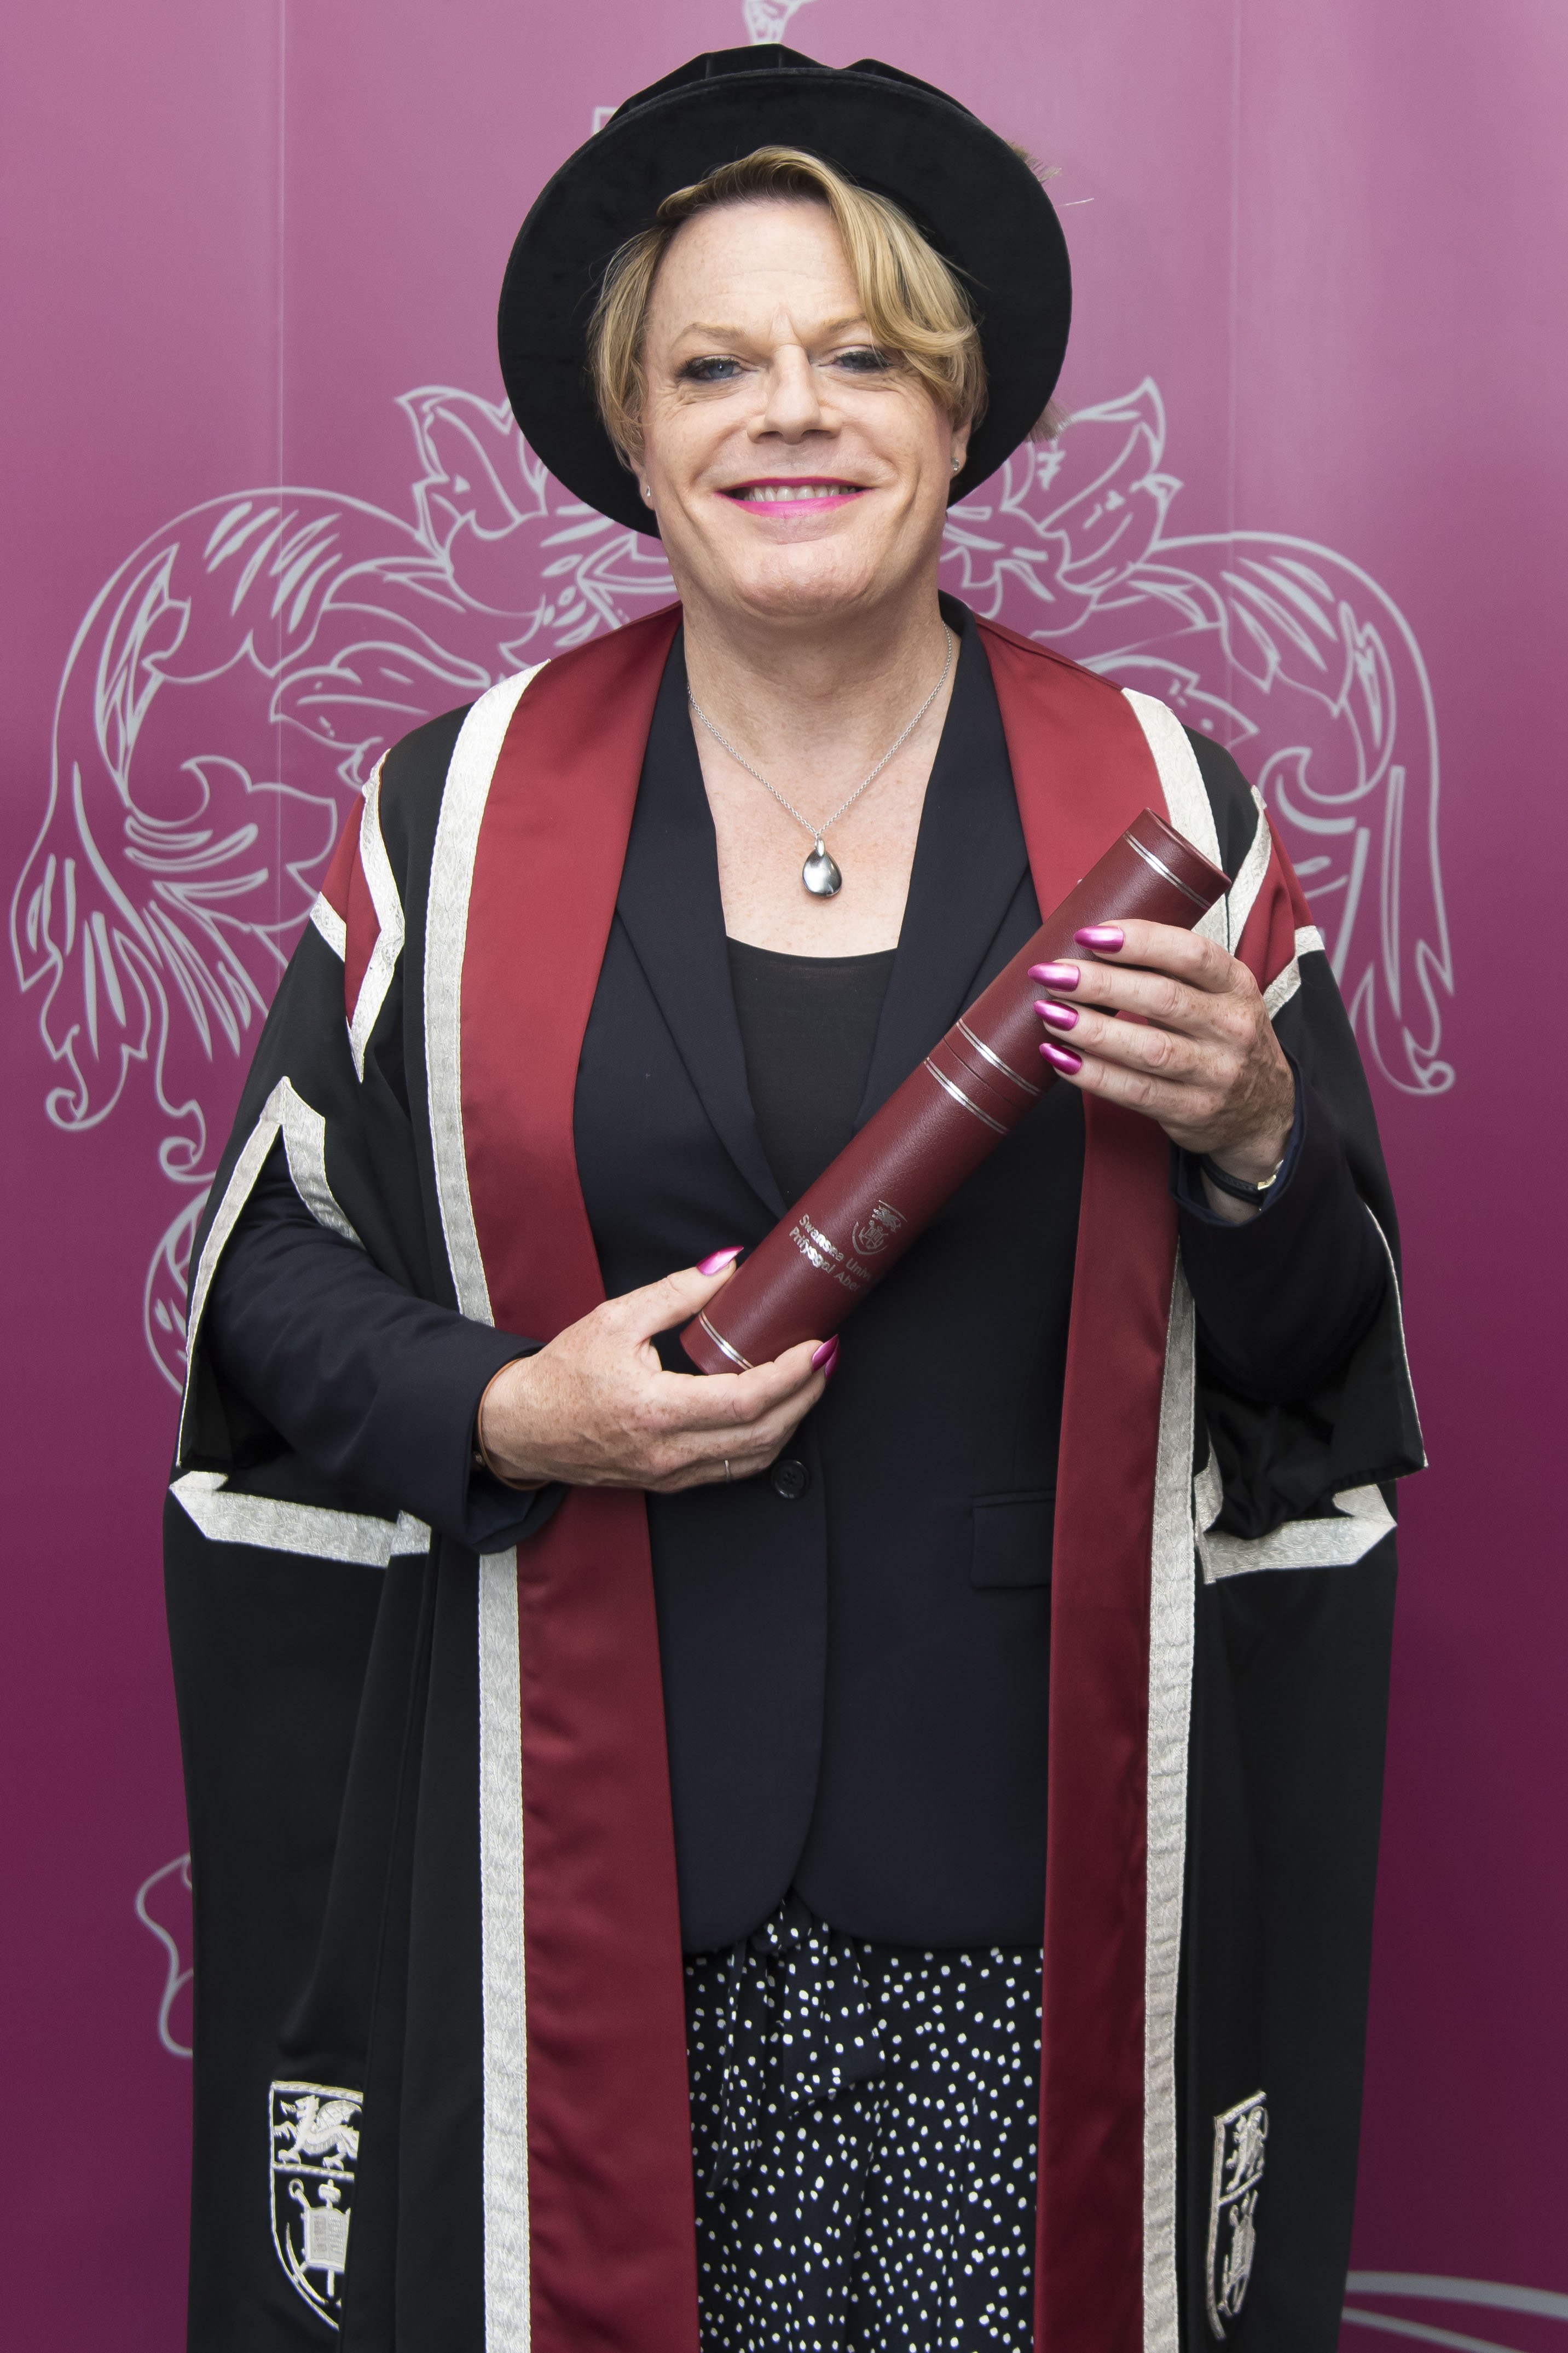 Eddie Izzard after receiving an honorary degree at Swansea University on July 25, 2019 | Source: Getty Images